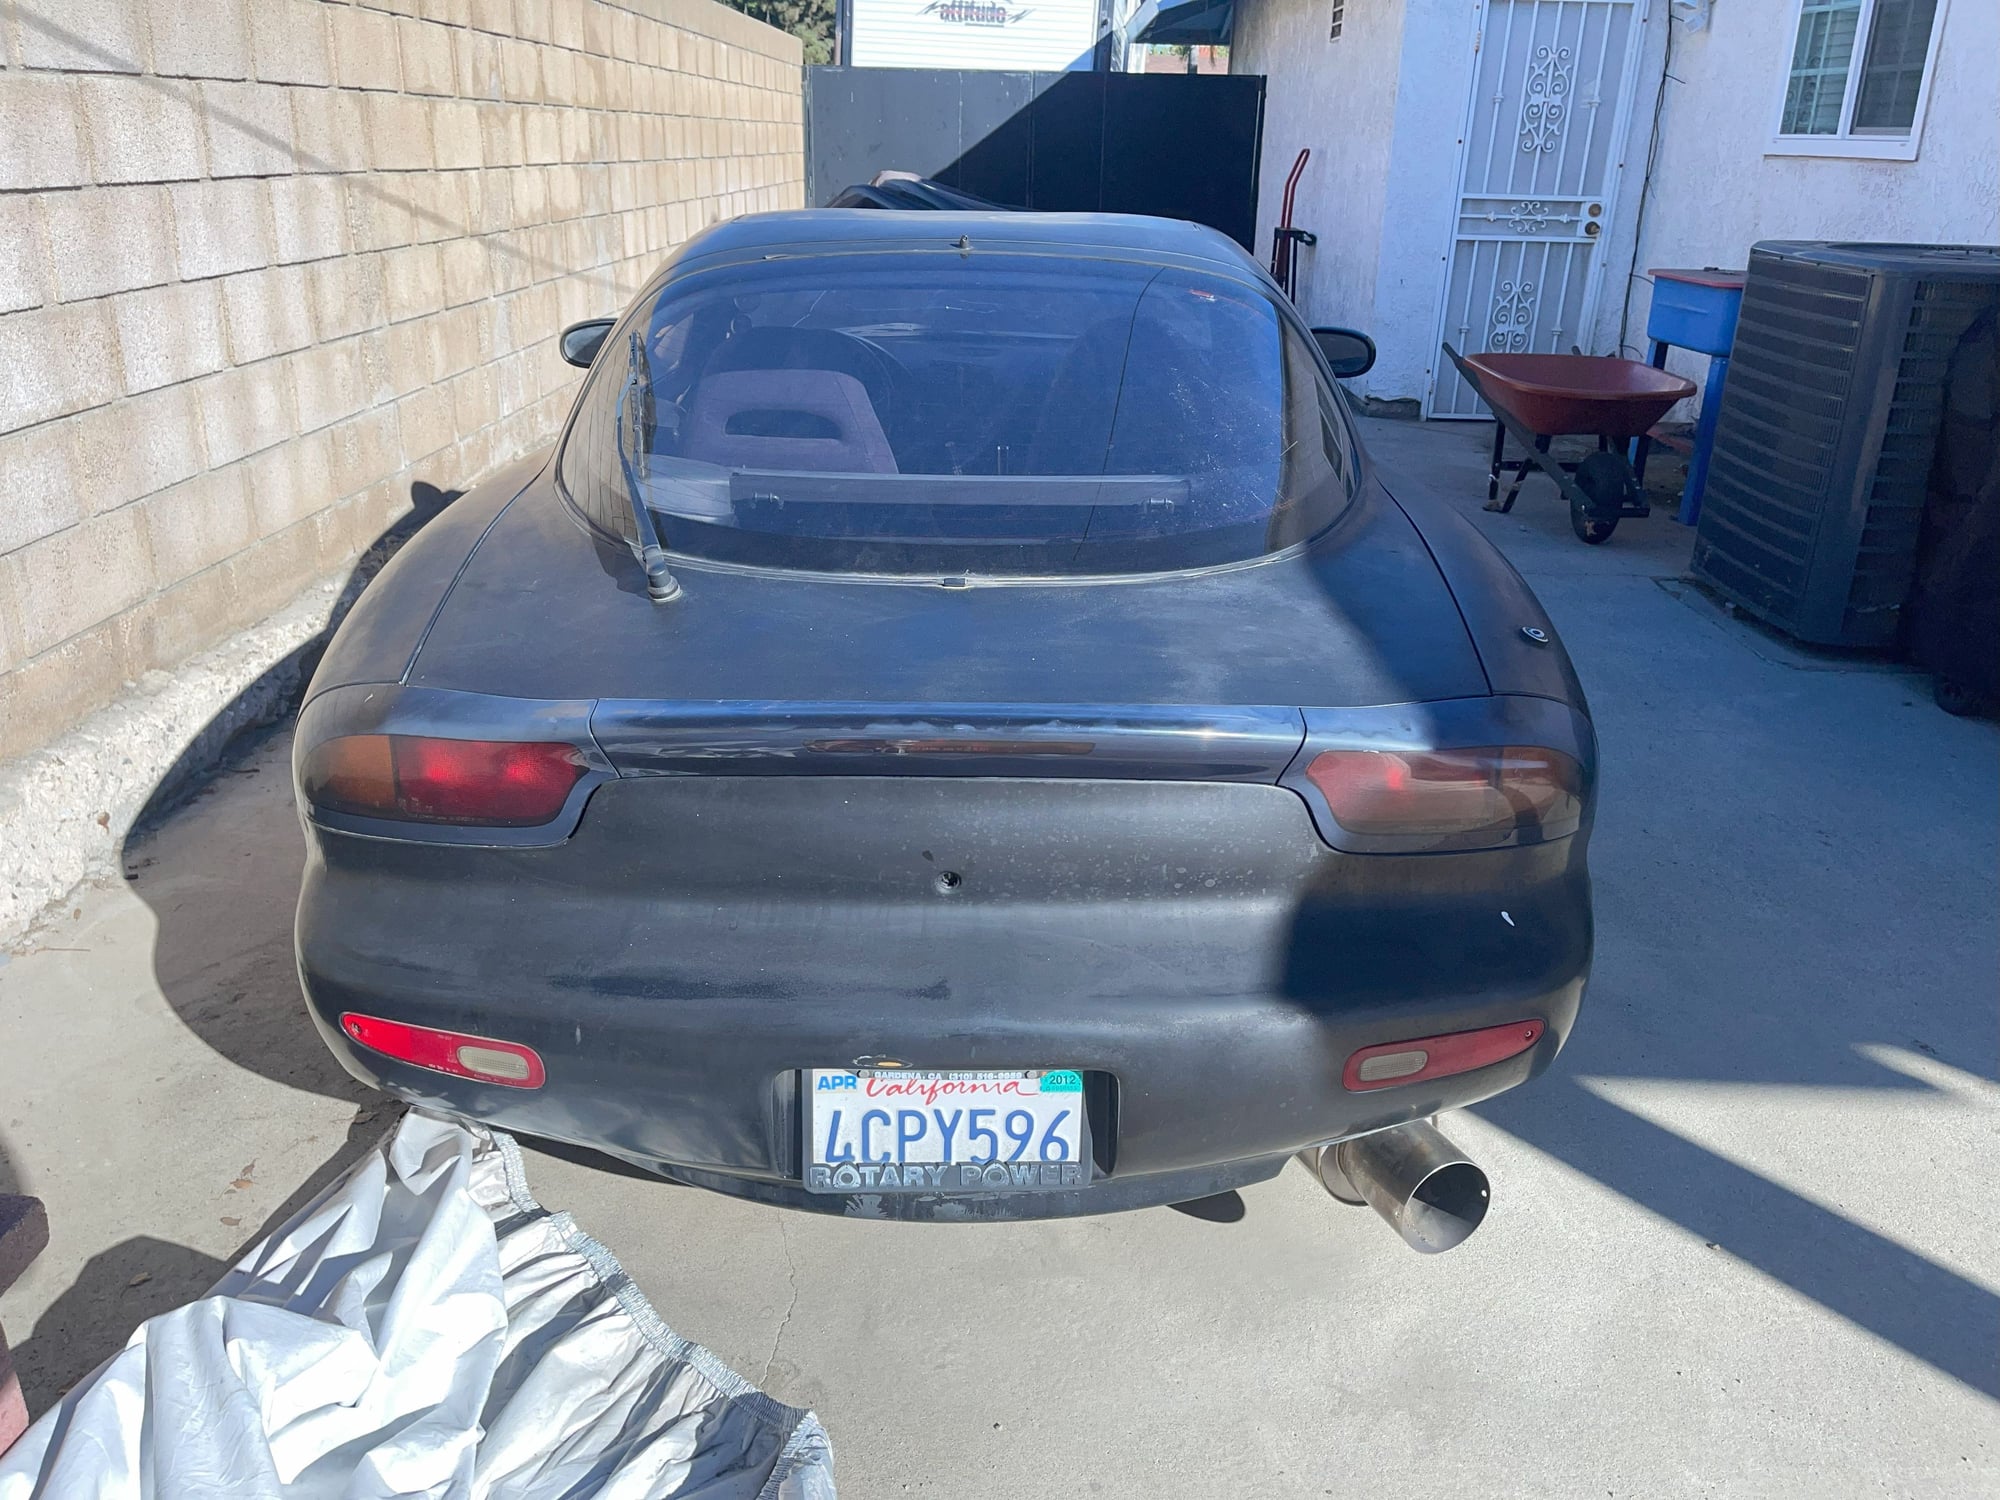 1993 Mazda RX-7 - For Sale 1993 Mazda RX-7 Touring, Clean Title, needs rebuild - Used - VIN JM1FD3311P0202232 - Other - 2WD - Manual - Coupe - Black - Ontario, CA 91764, United States